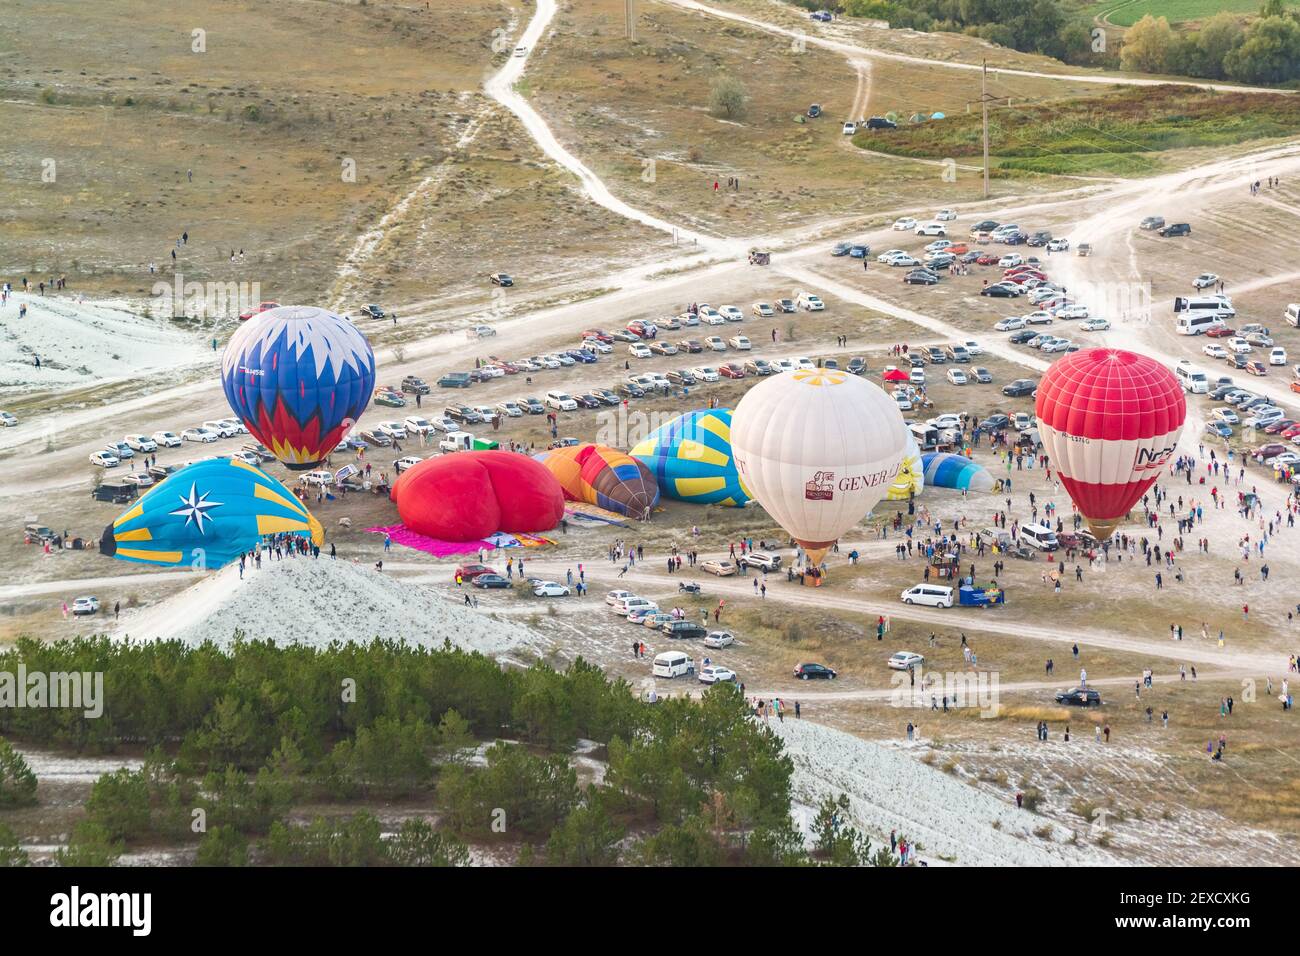 Russia, Crimea, Belogorsk September 19, 2020-Preparation for the launch of balloons at the festival of aeronautics at the foot of the White Rock Mount Stock Photo